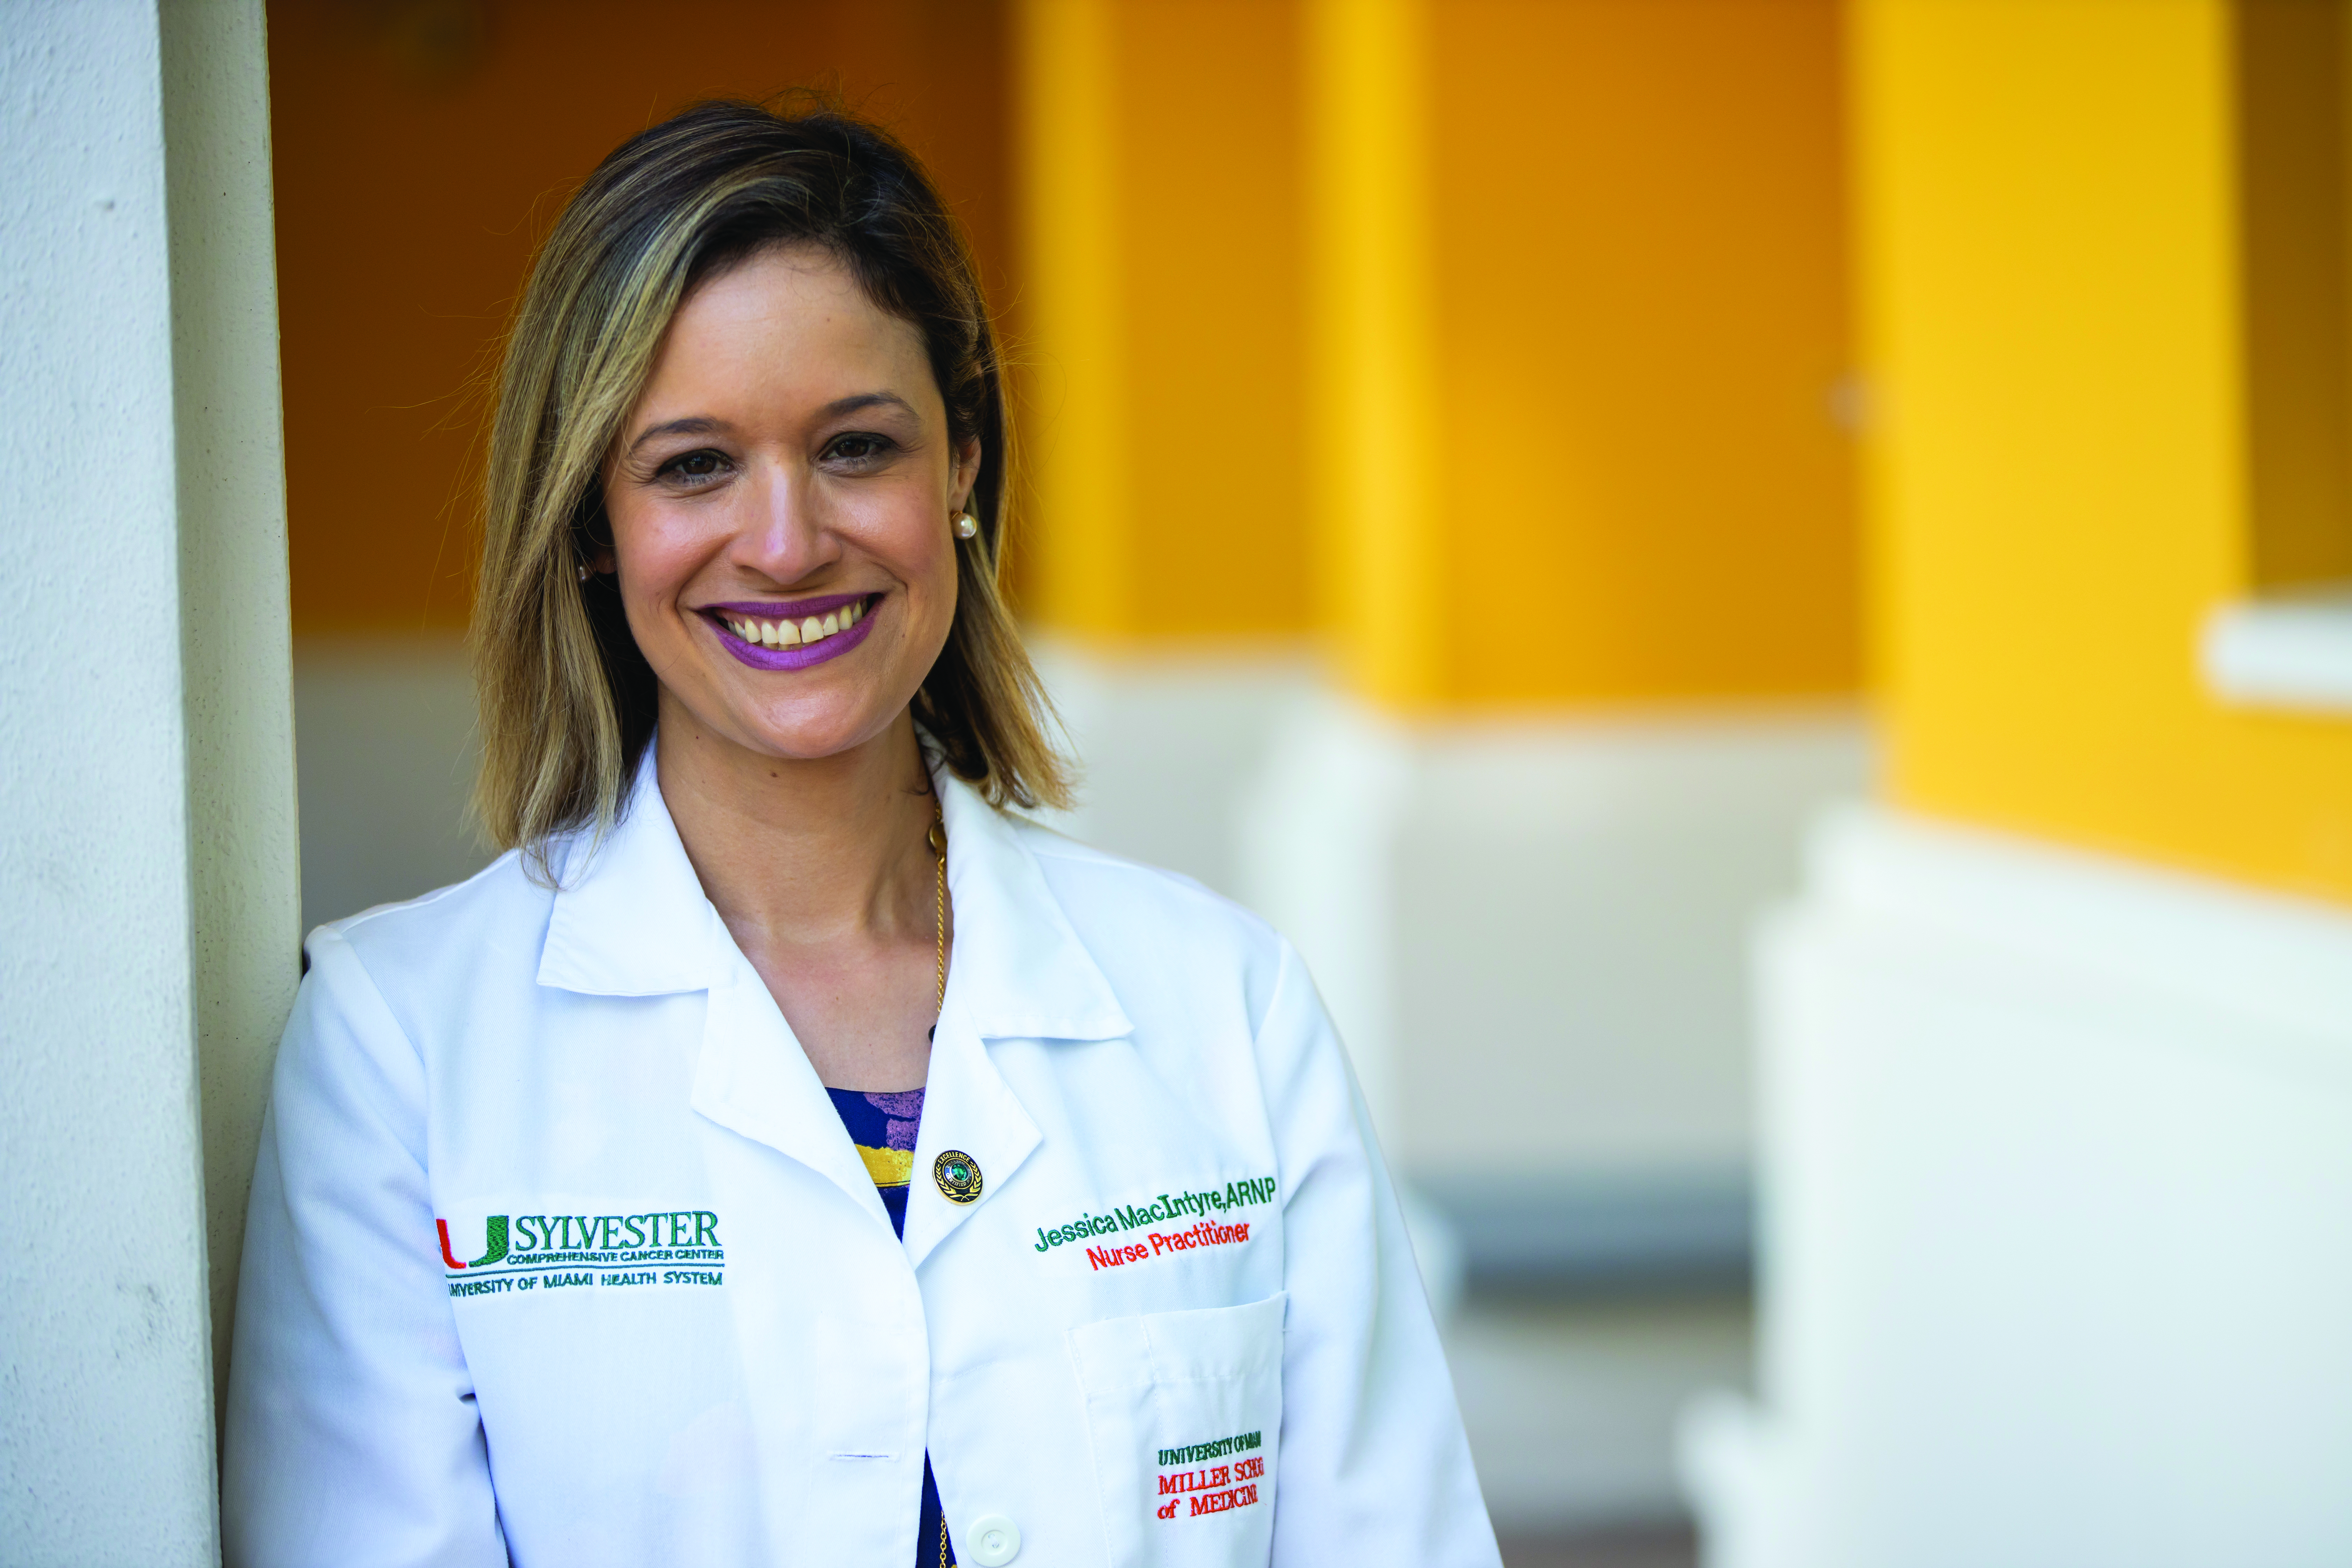 ONS member Jessica MacIntyre, DNP, MBA, APRN, AOCNP®, executive director of clinical operations and advanced practice RN at the Sylvester Comprehensive Cancer Center in Miami, FL, and member of the Miami-Dade ONS Chapter